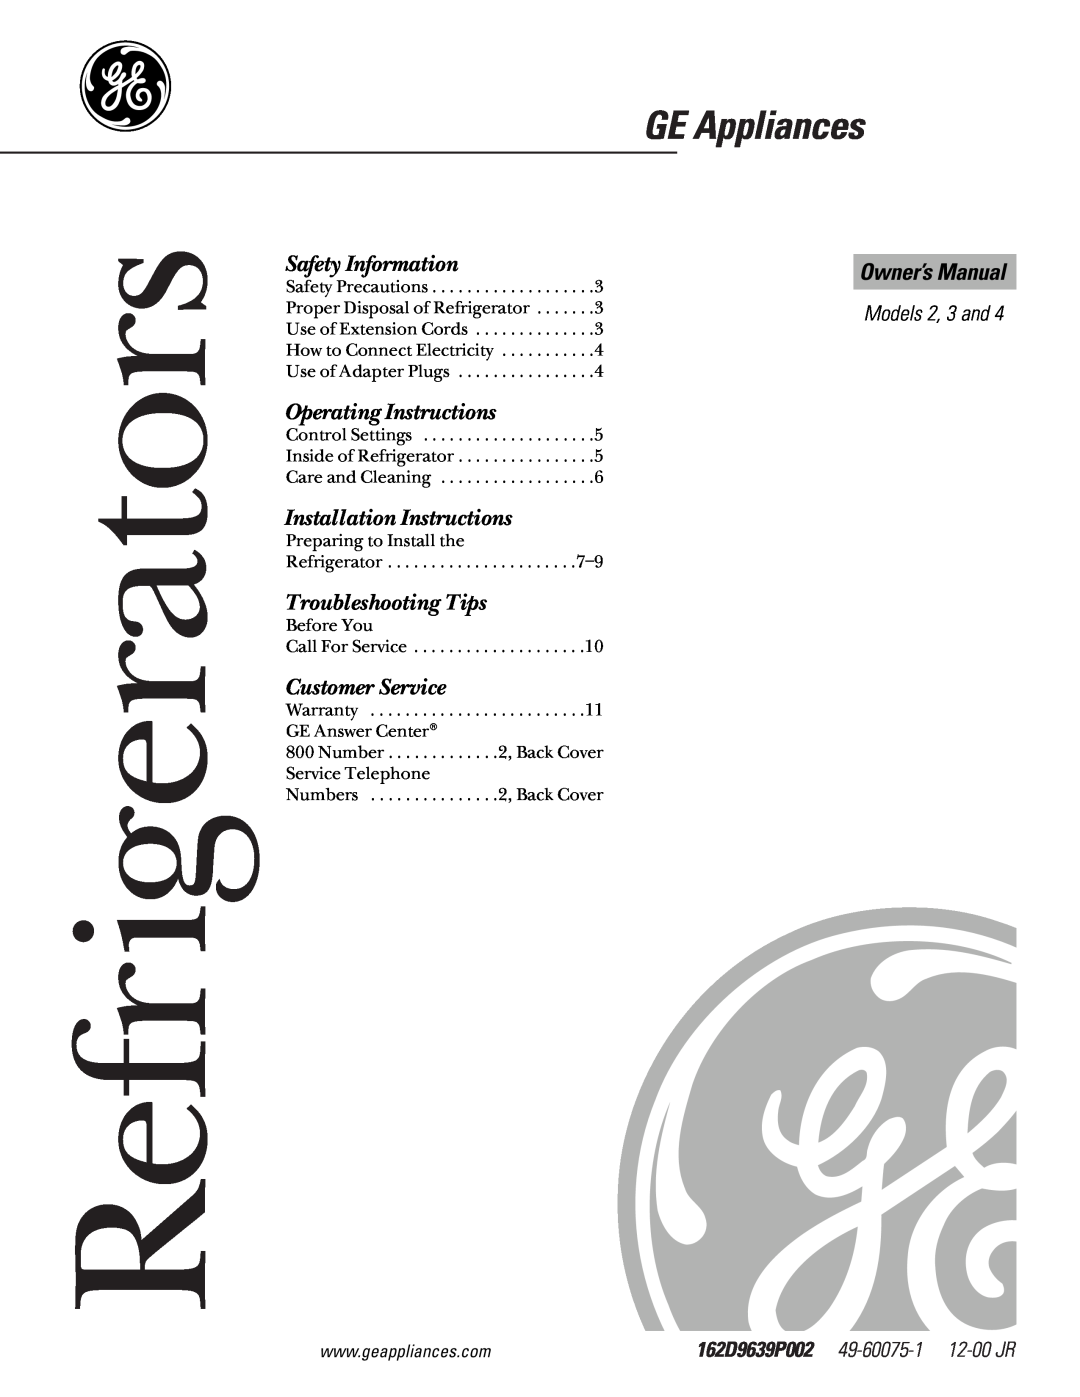 GE and 4 owner manual Models 2, 3 and, Refrigerators, GE Appliances, Safety Information, Operating Instructions 